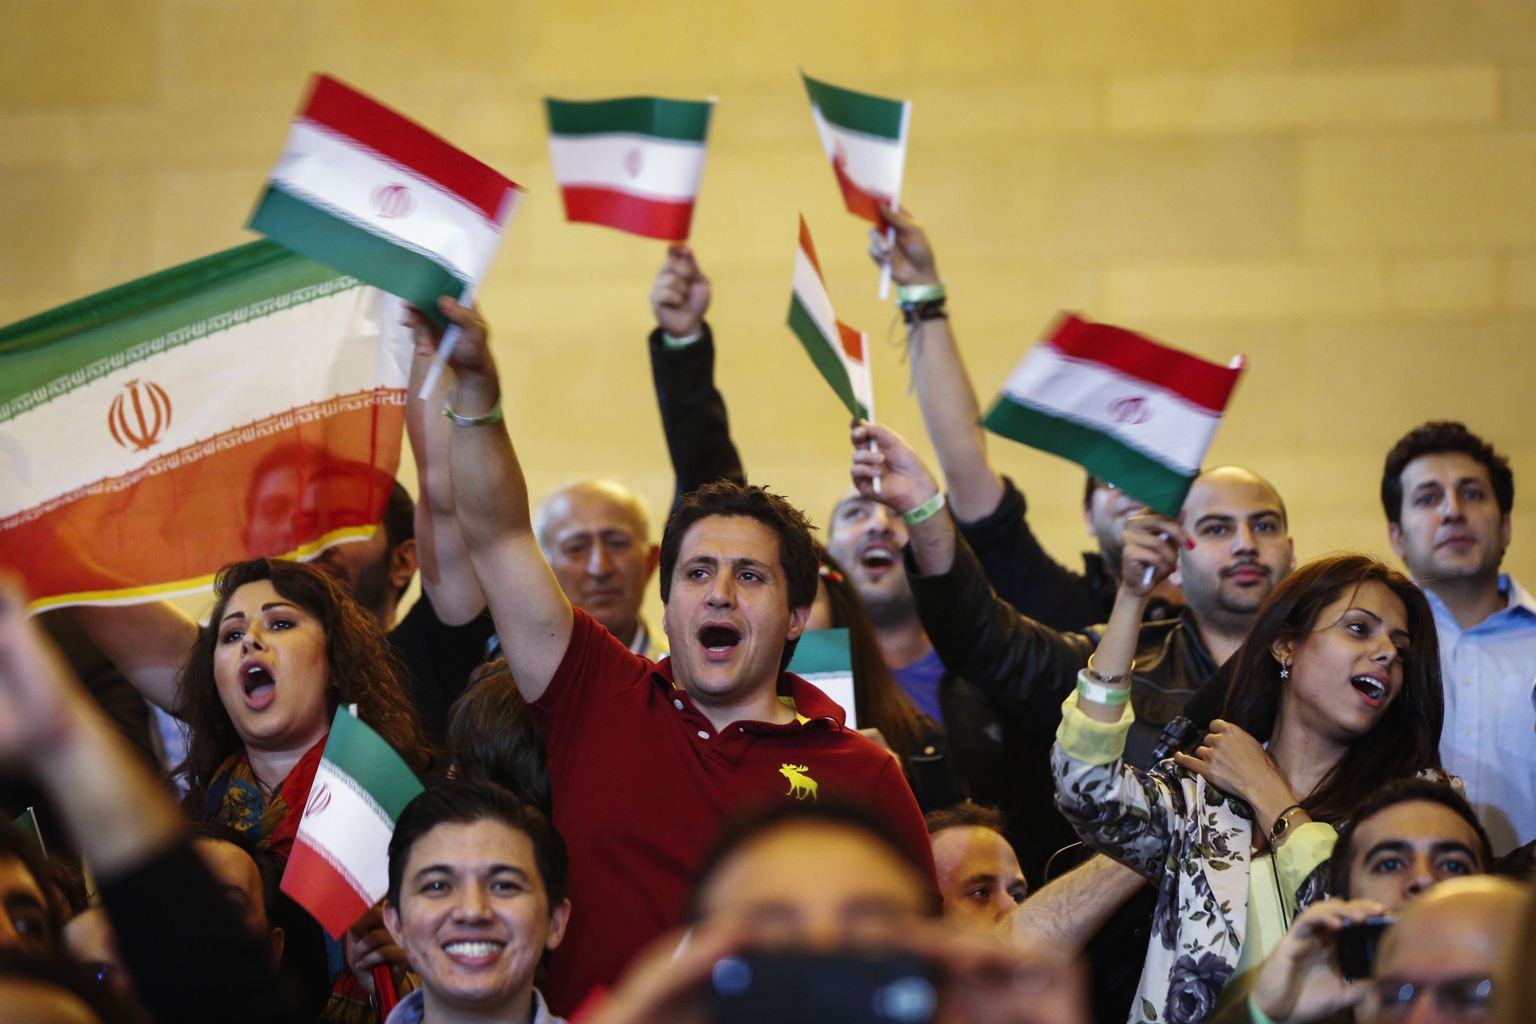 Iranian fans at Rumble on the Rails May 2013